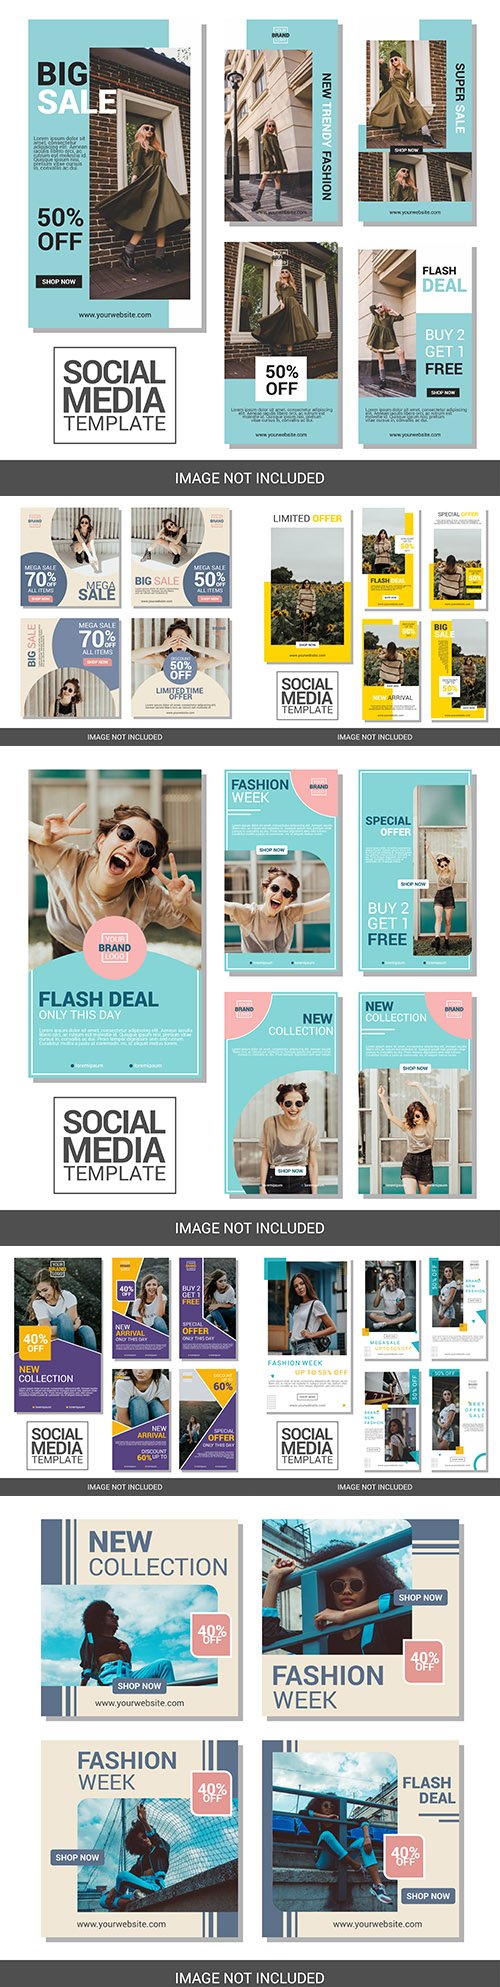 Social story collections instagram and banner design template